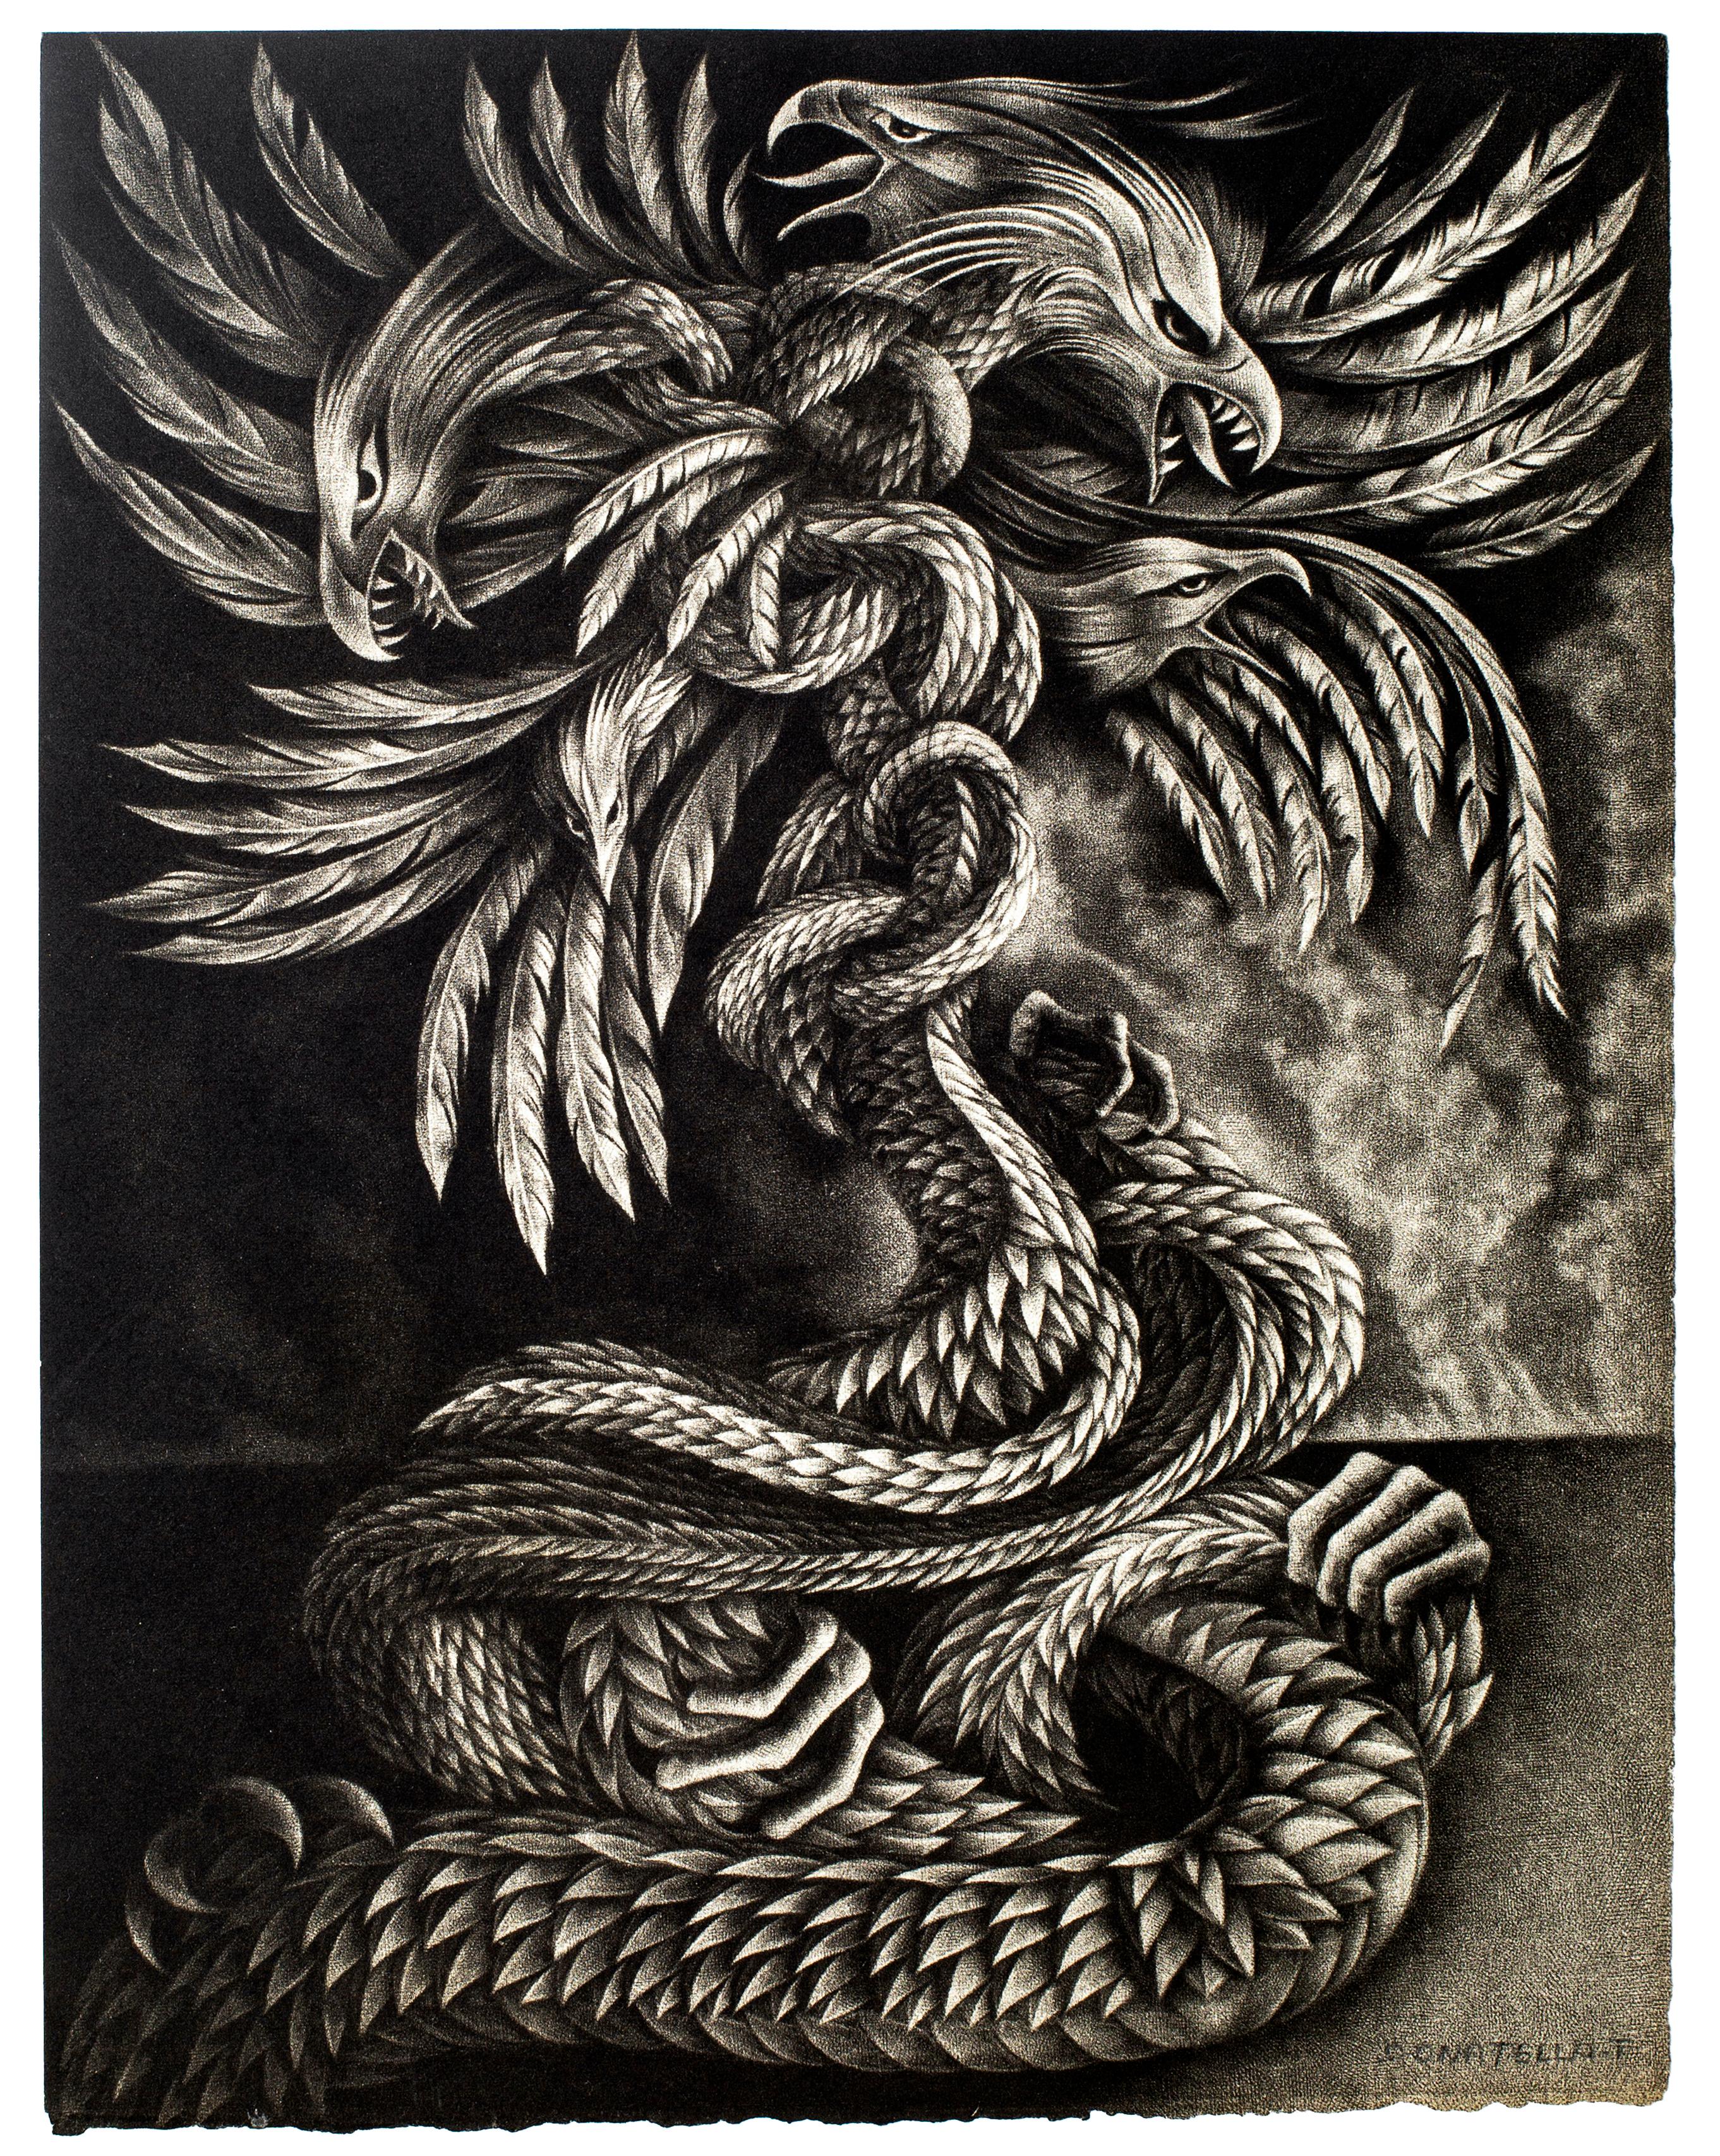 Hydra -Lithograph by D. These - Late 20th Century